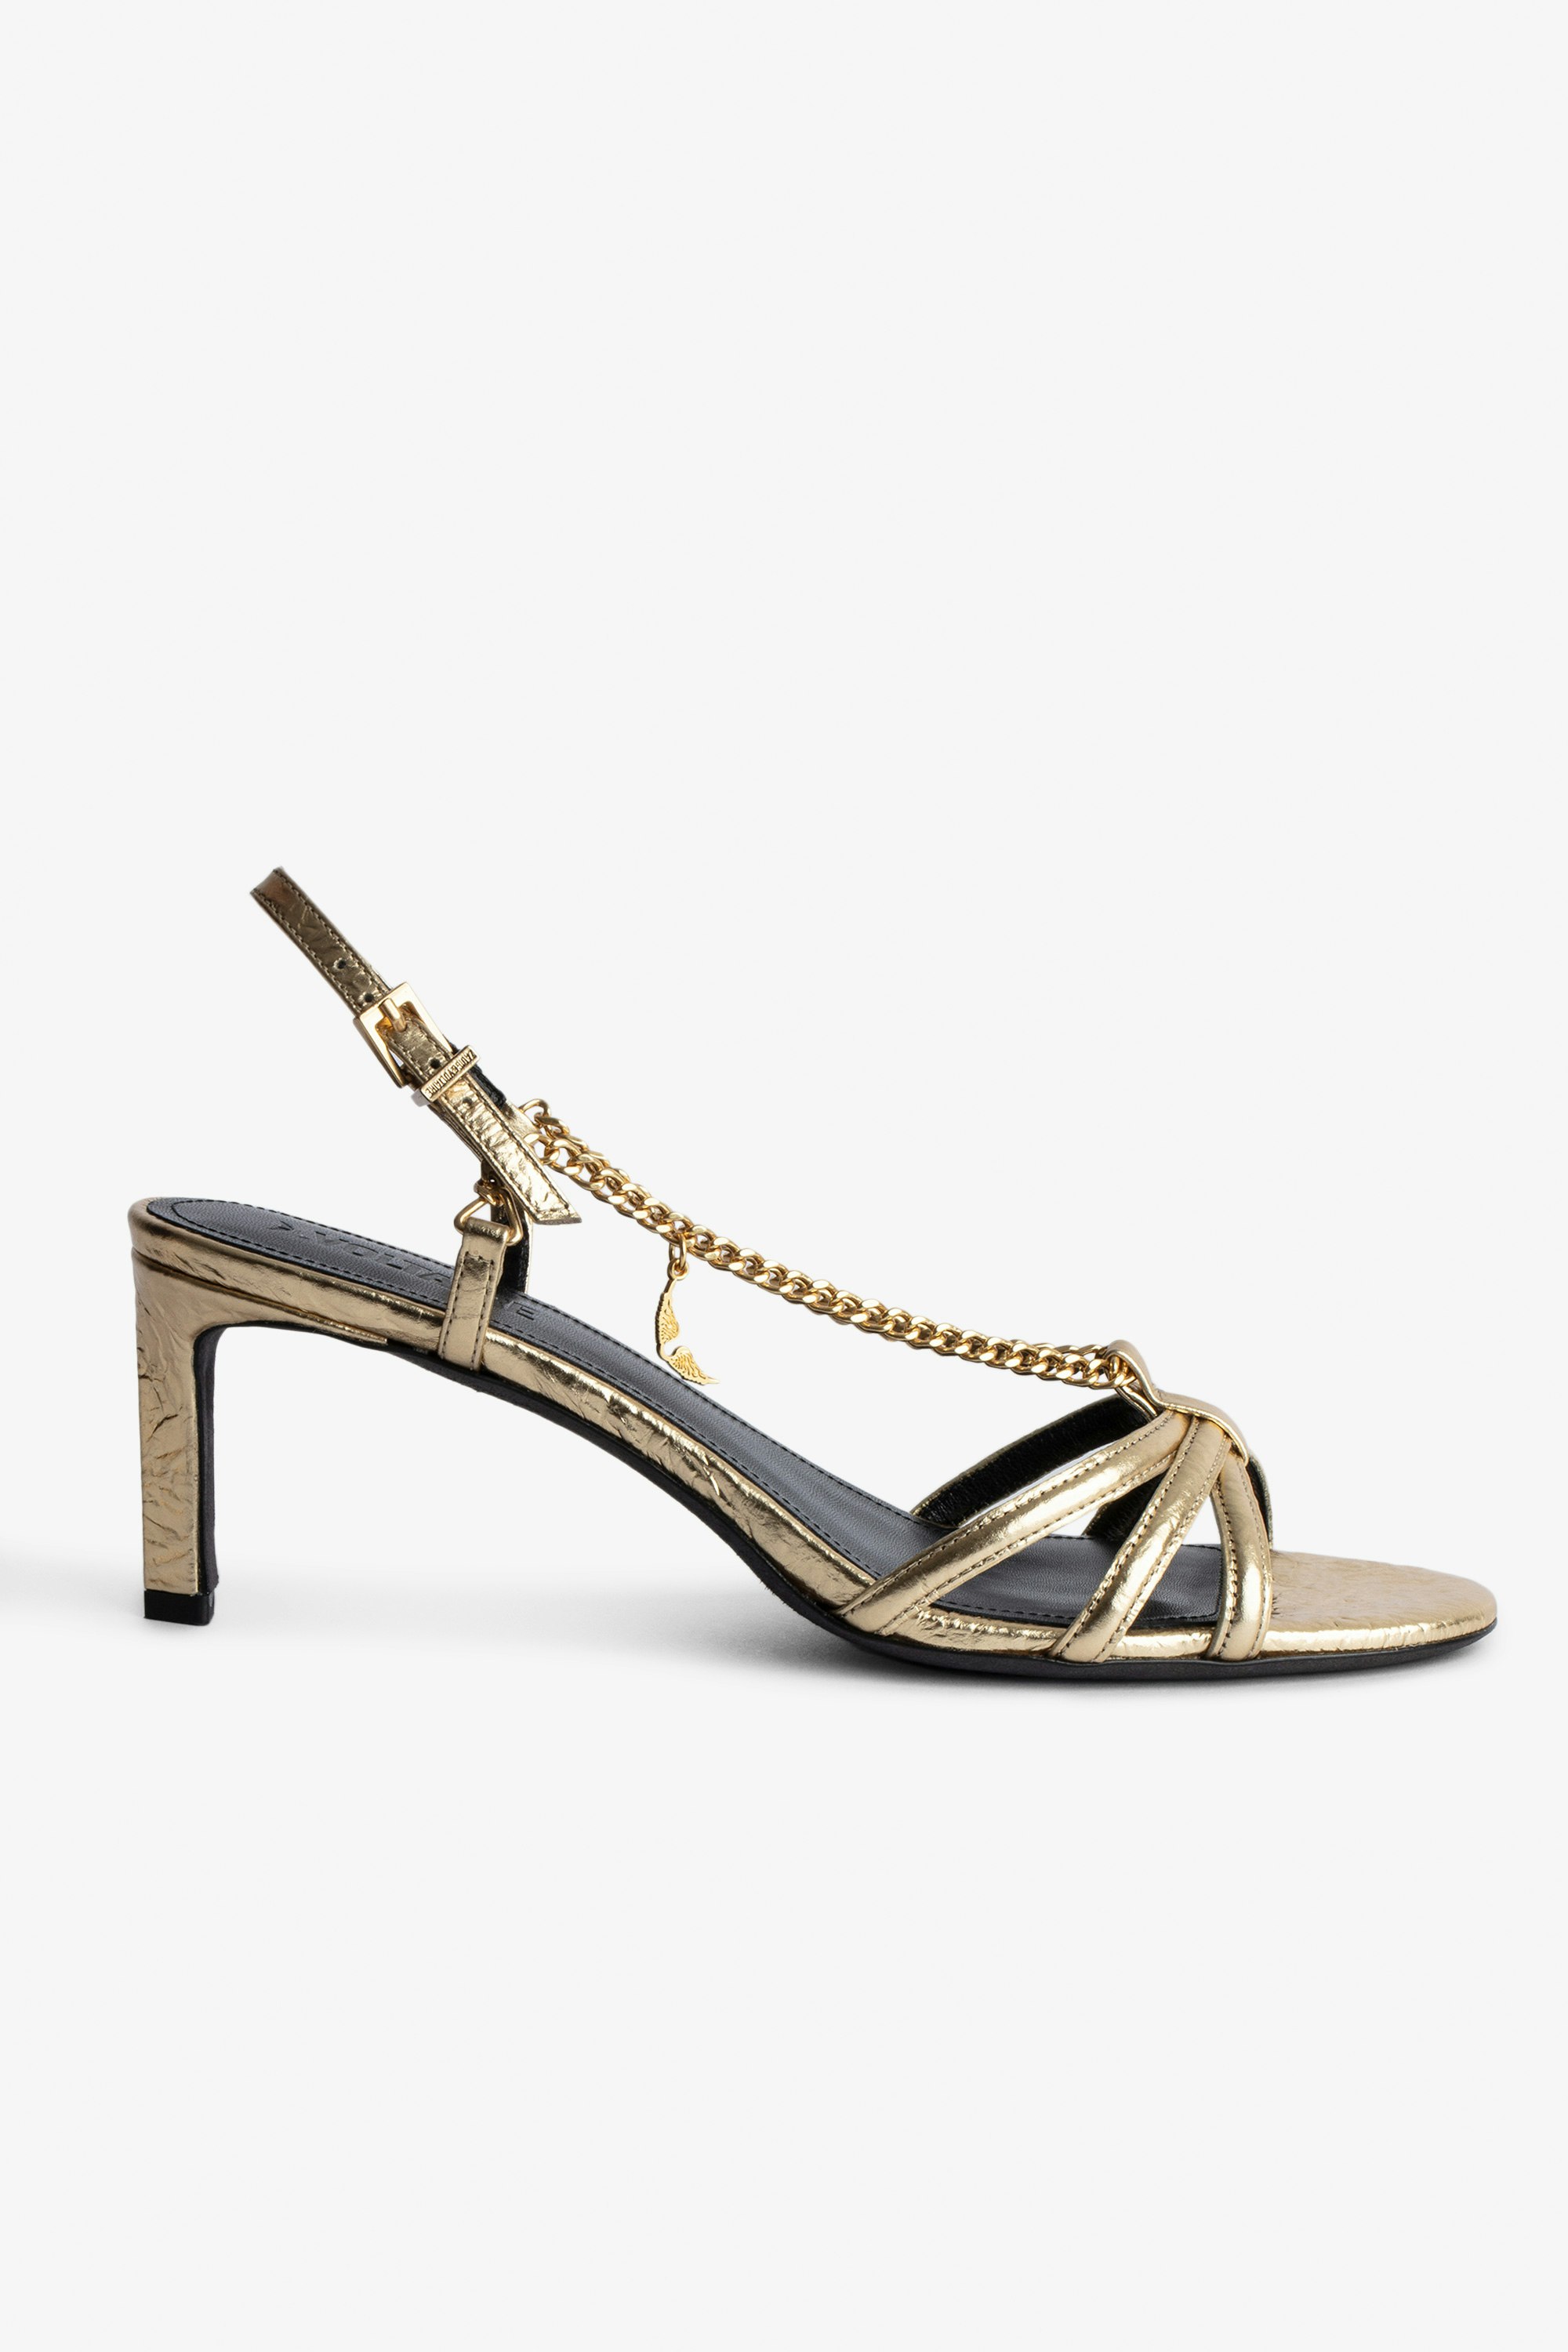 Sleepless Sandals - Women’s metallic gold crinkled leather sandals with straps and chains